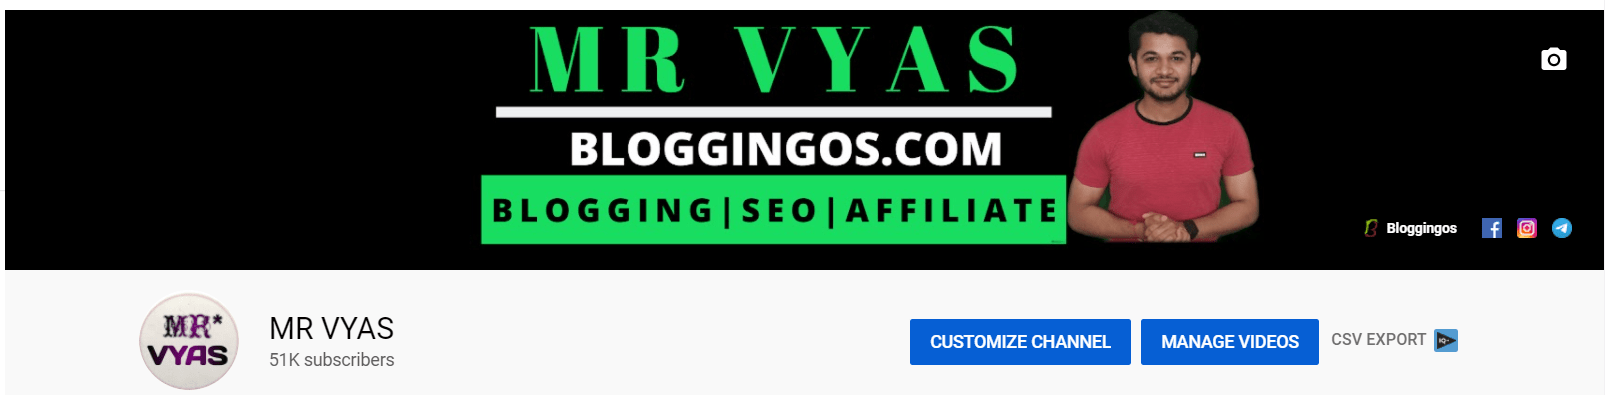 MR VYas YouTube channel